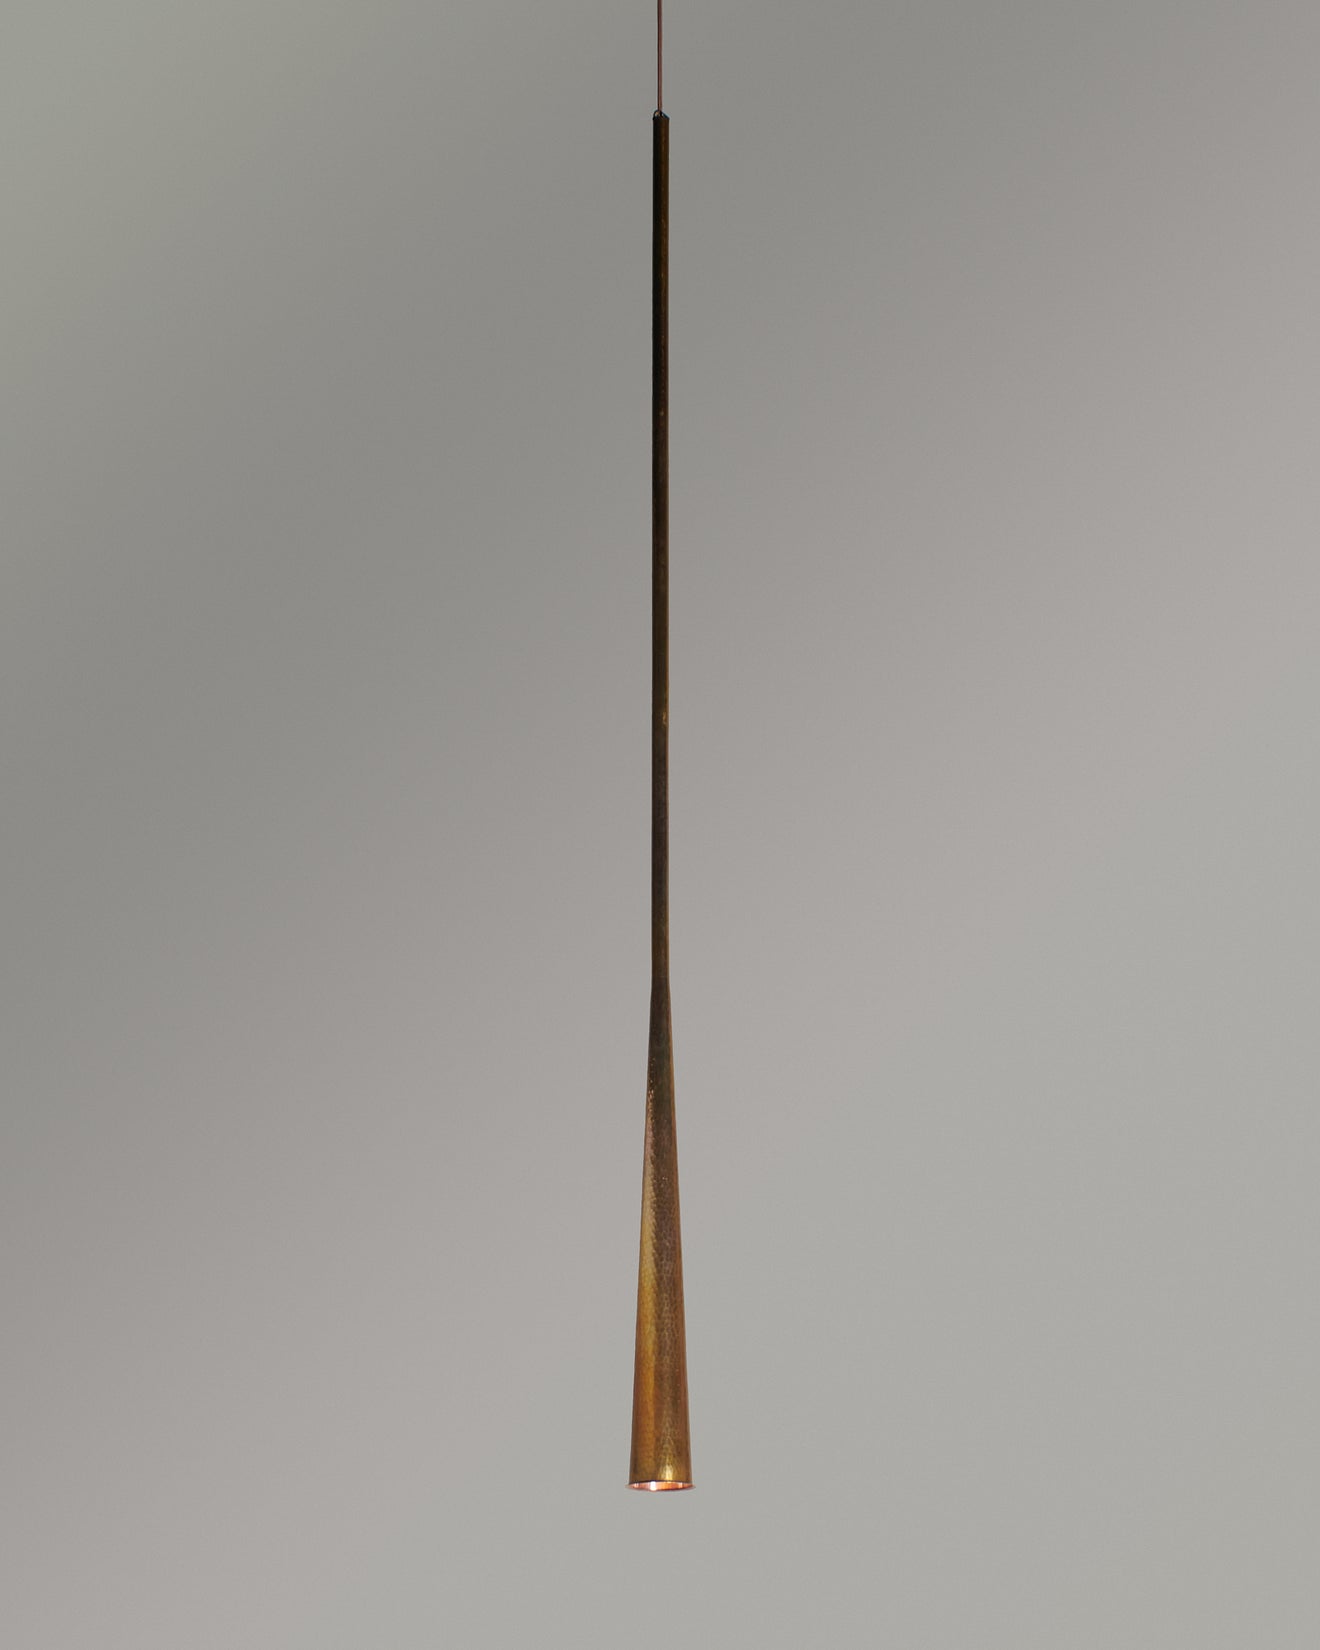 COPPER TRUMPET HANGING SPOTLIGHT BY CARLO PUNZO